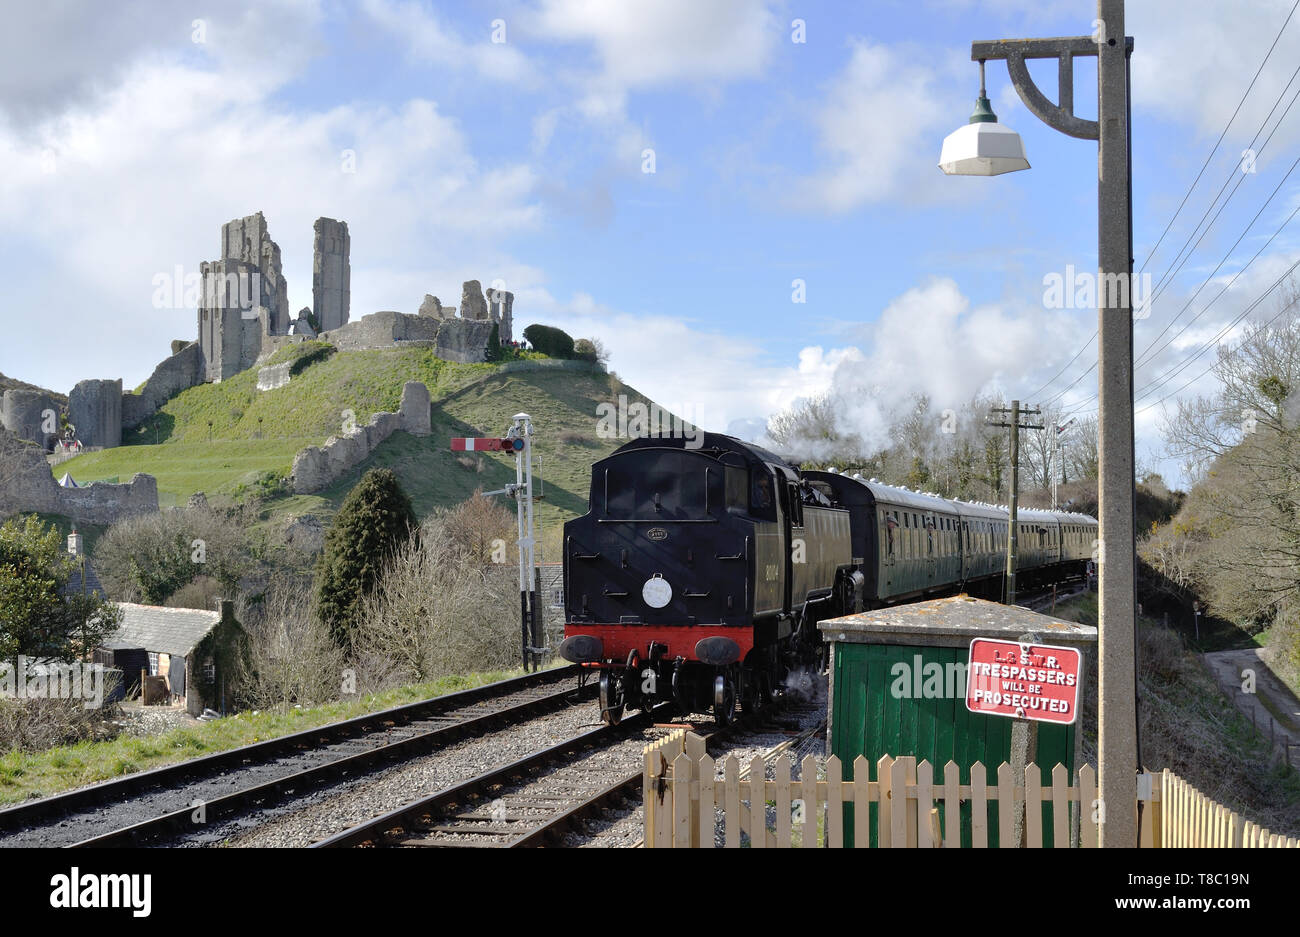 Preserved Standard Class 4MT 2-6-4T no. 80104 passes the castle ruins as it arrives at Corfe Castle station on the Swanage Railway in Dorset. Stock Photo